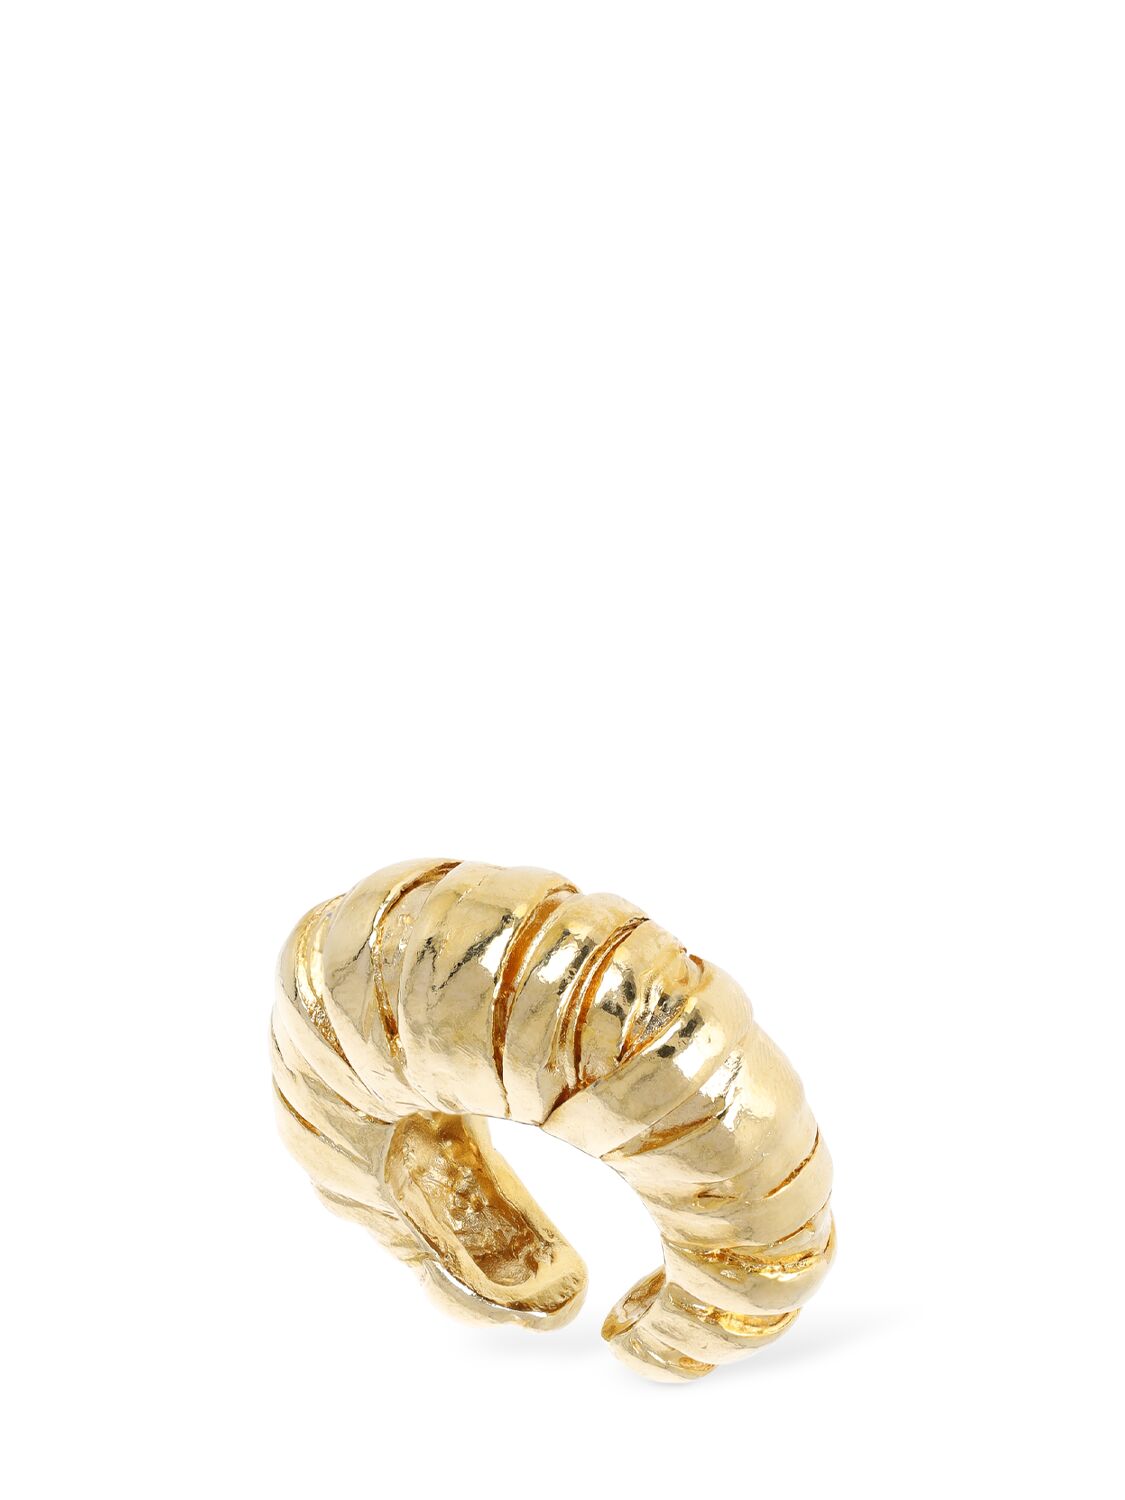 Paola Sighinolfi Wrap Thick Ring In Gold